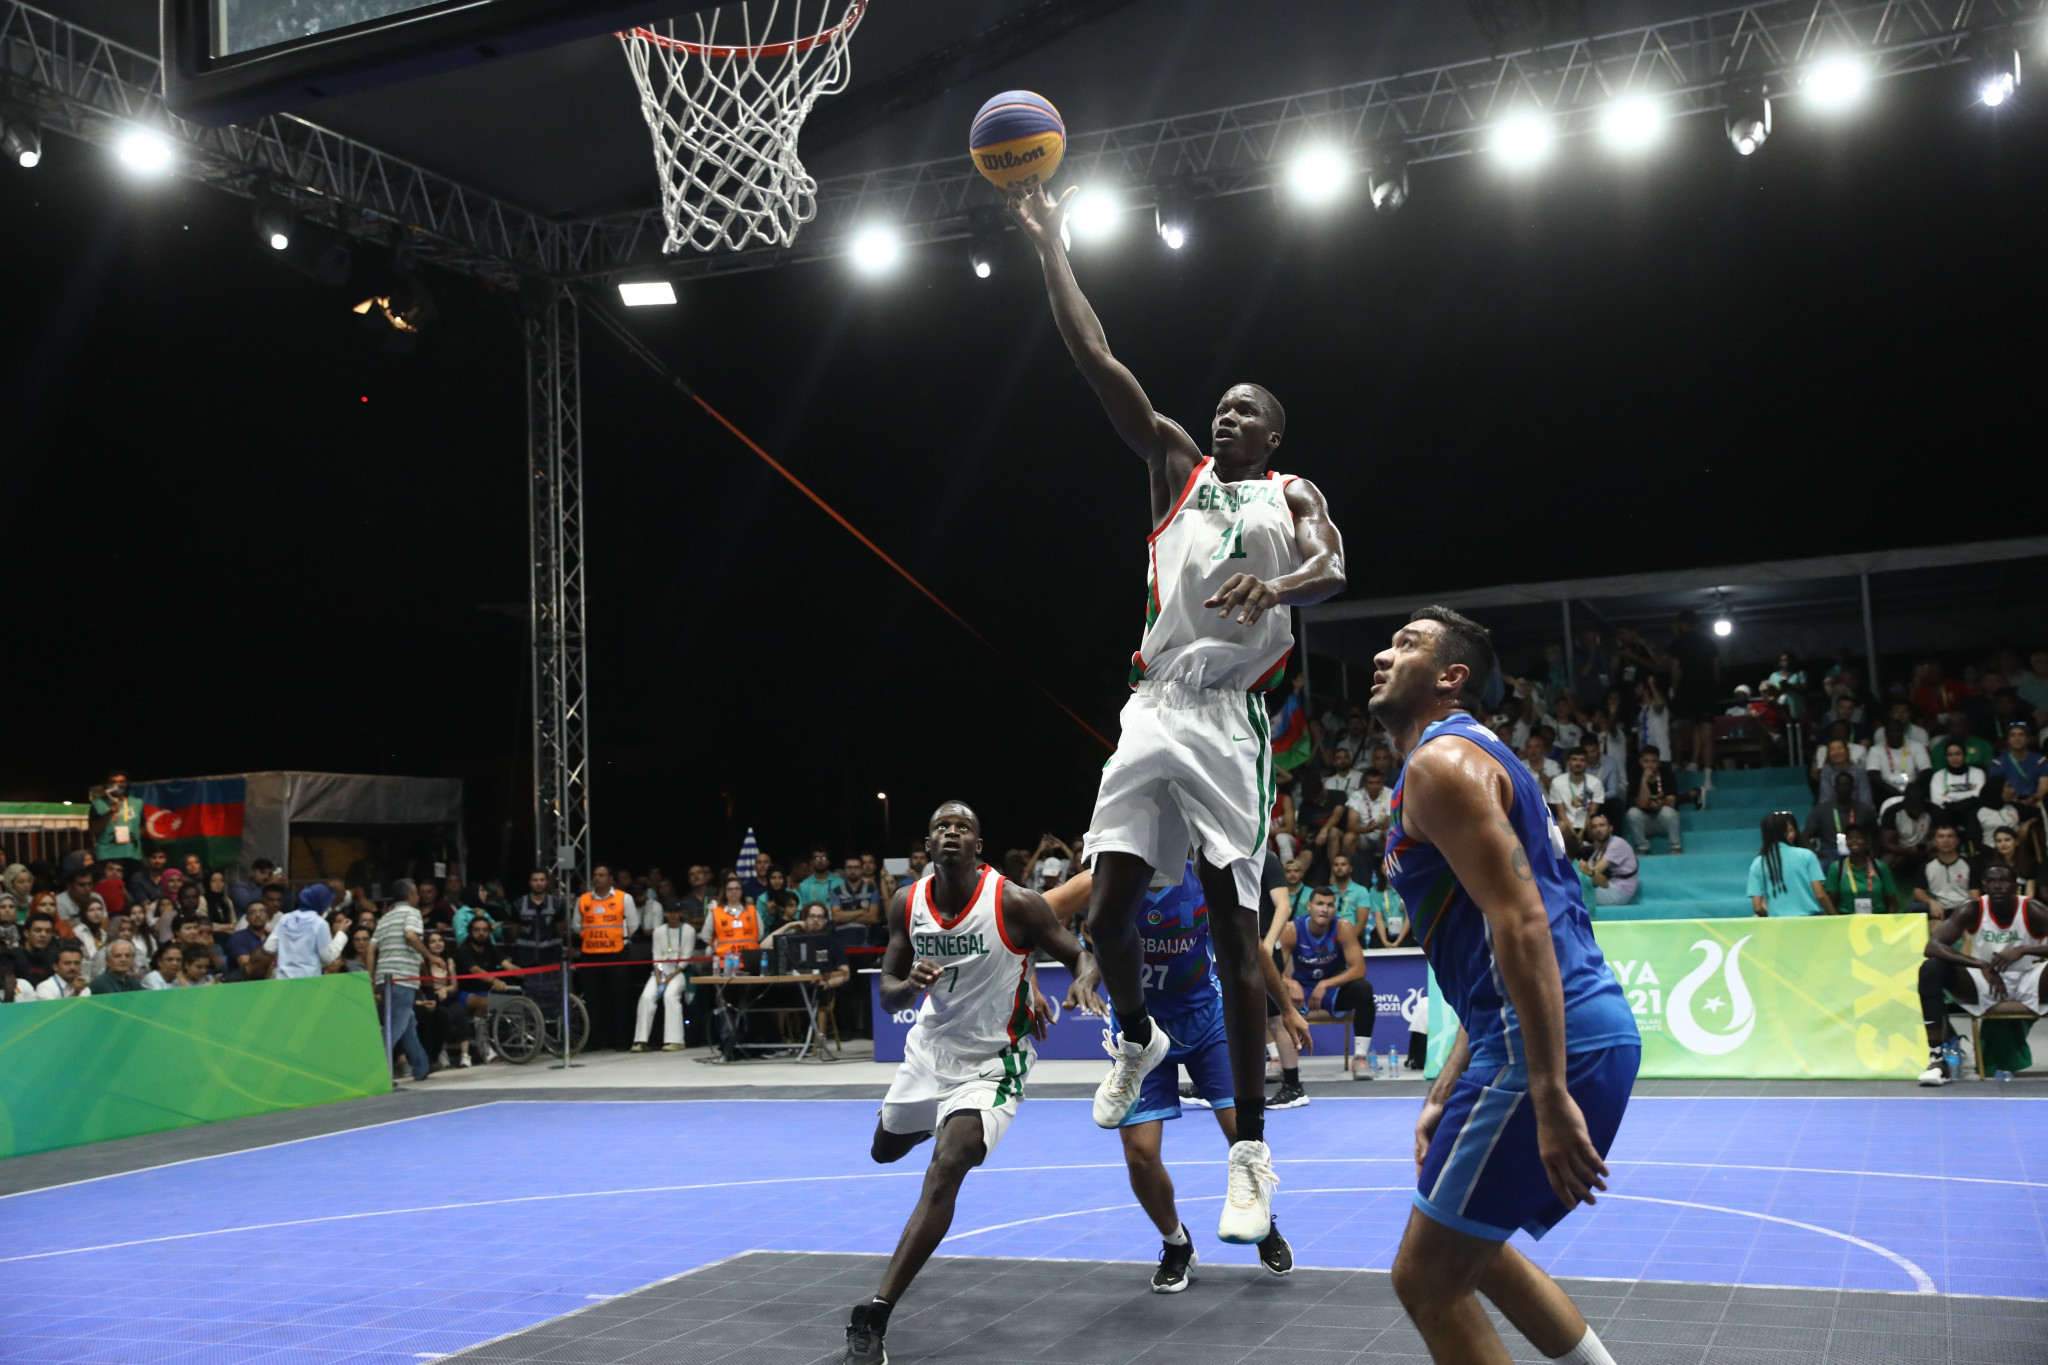 Mohamed Doumbya produced a superb leap to score and extend Senegal's advantage over Azerbaijan in the men's 3x3 basketball final ©Konya 2021